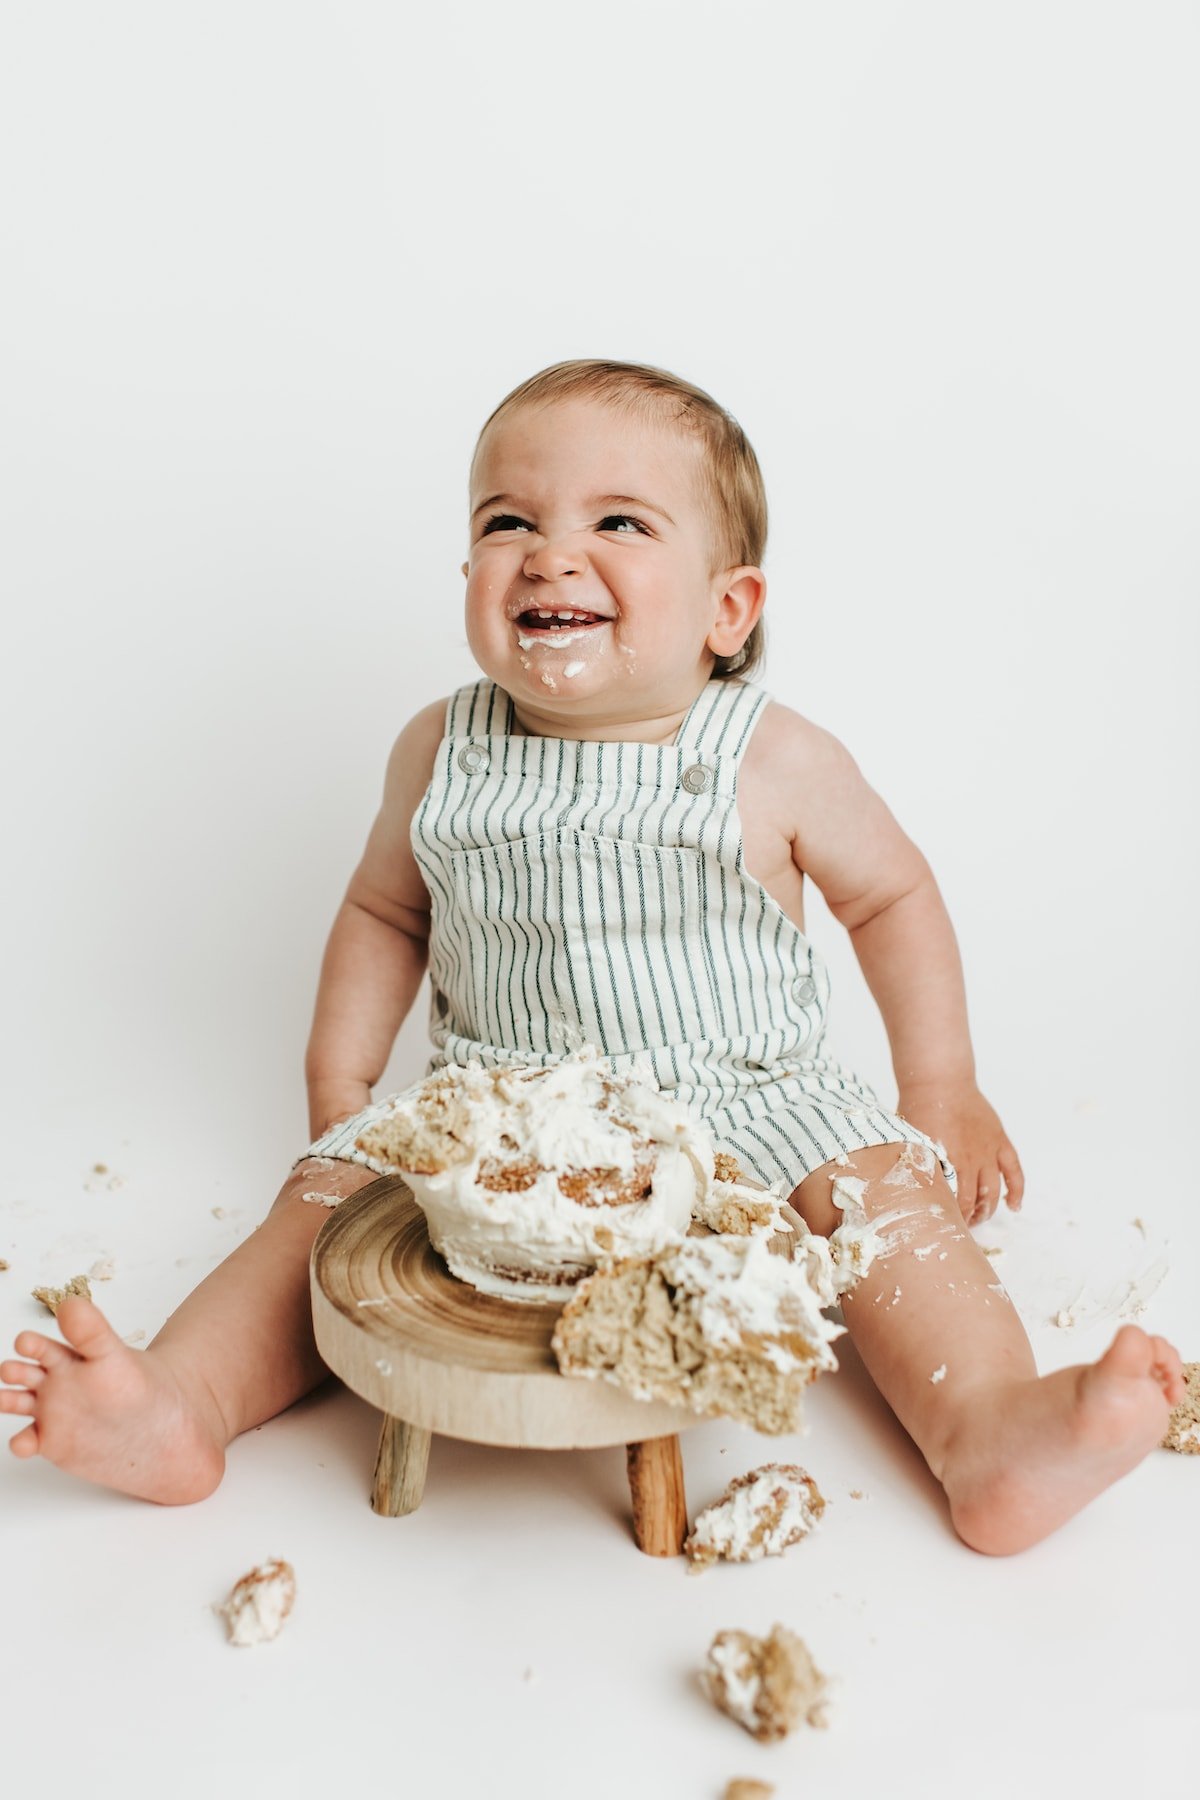 One year old baby boy in overalls smiling with smashed cake in front of him.